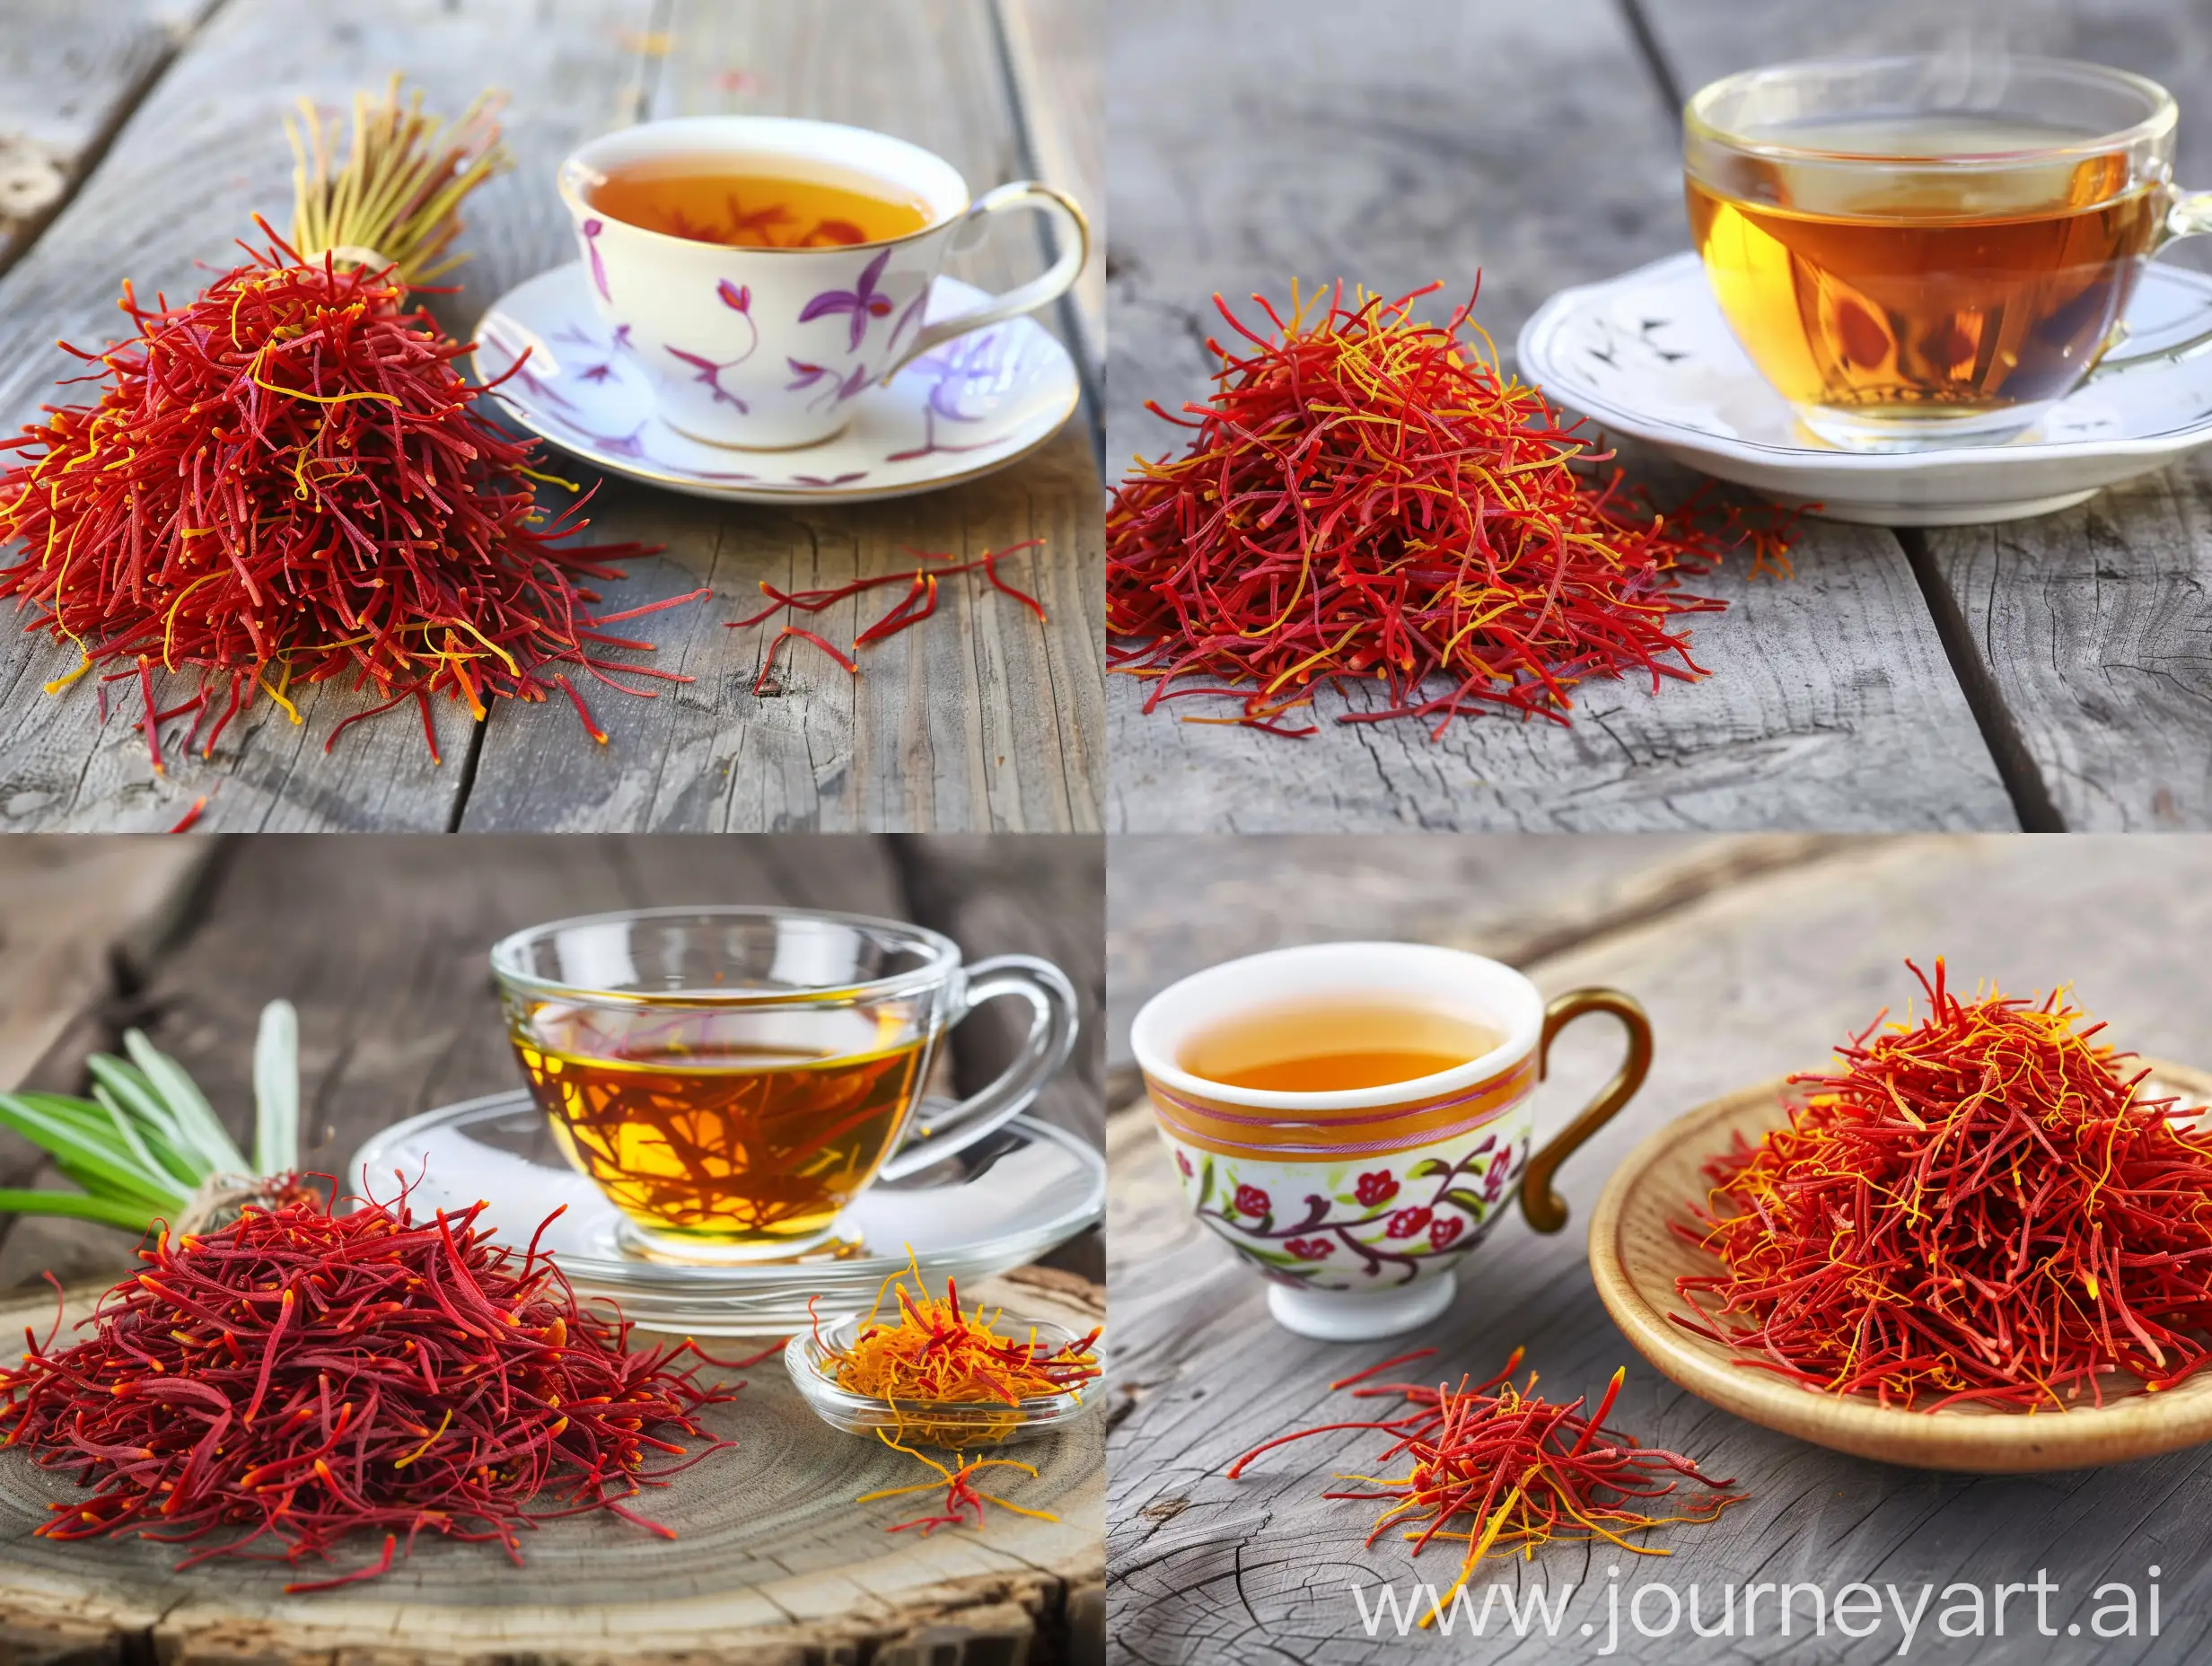 A bunch of saffron on the table with a cup of tea